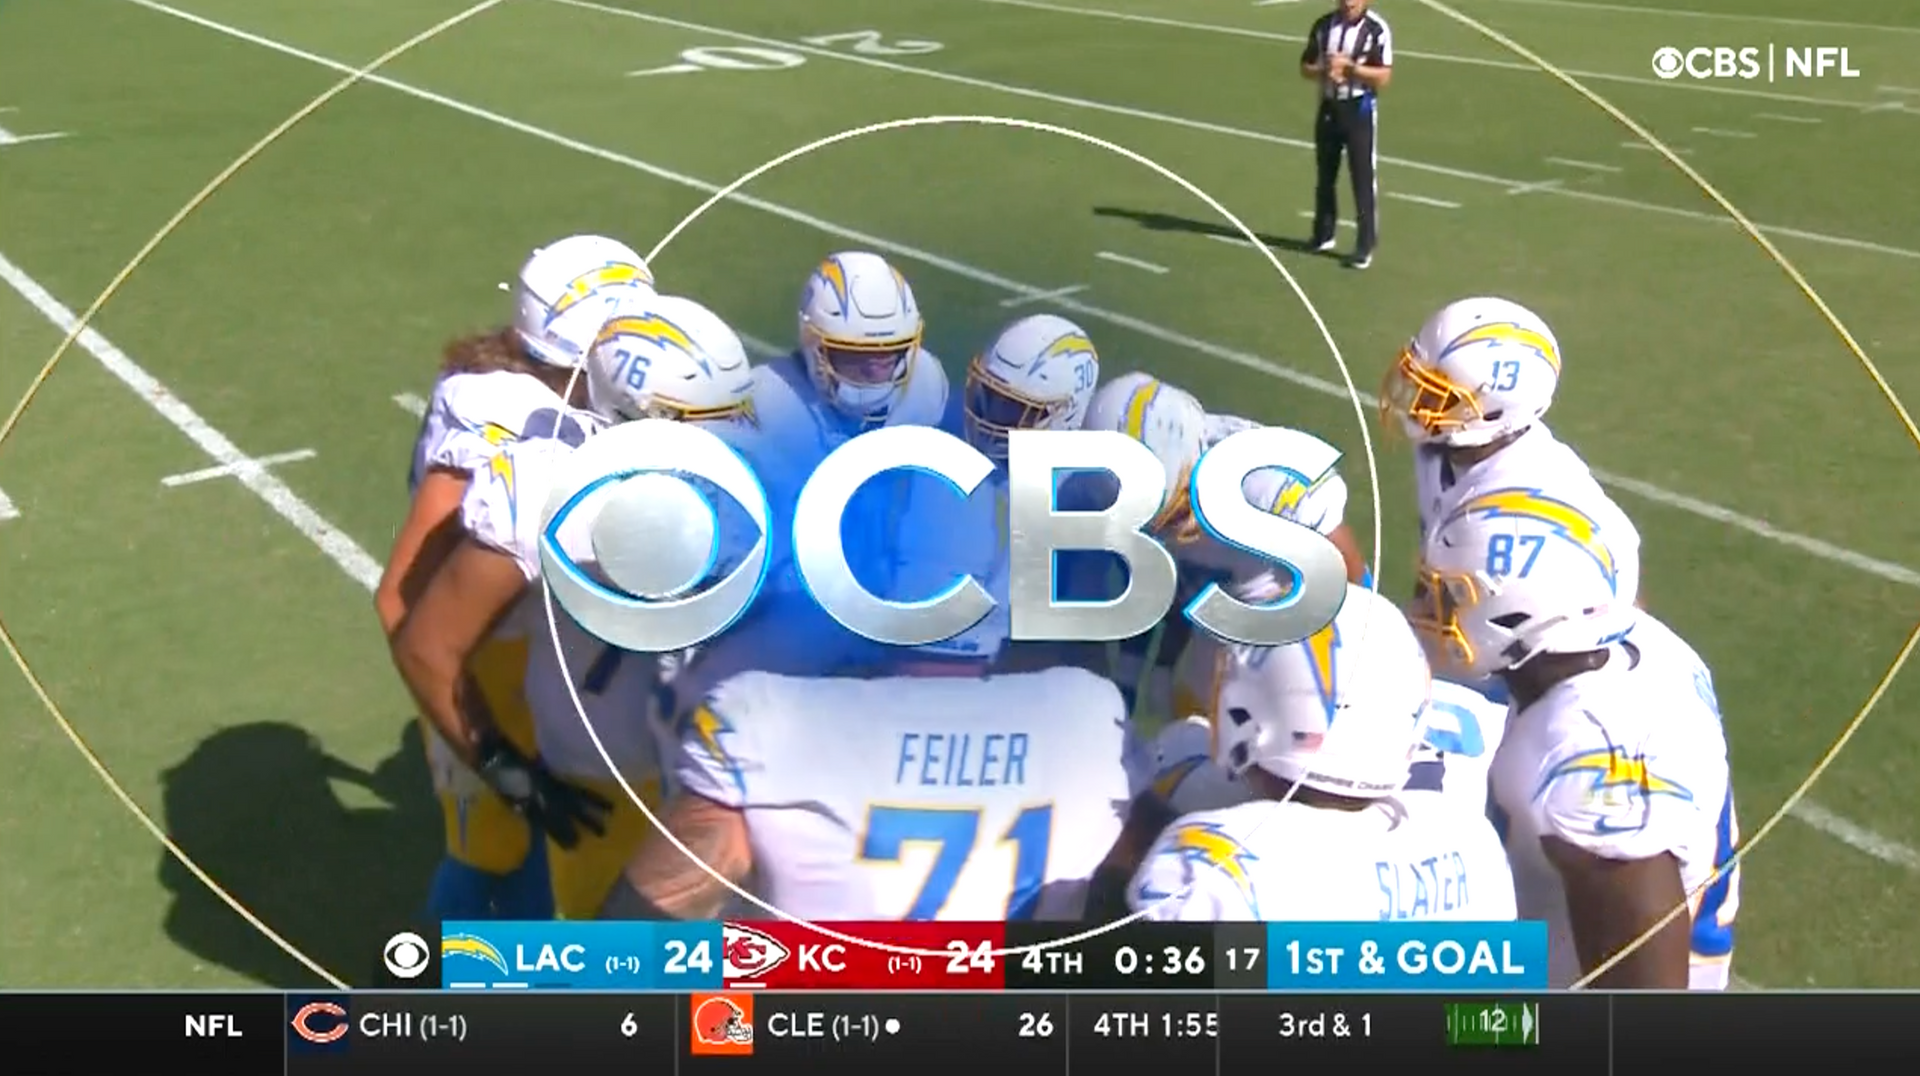 Finally, on CBS, the football matches the business cards